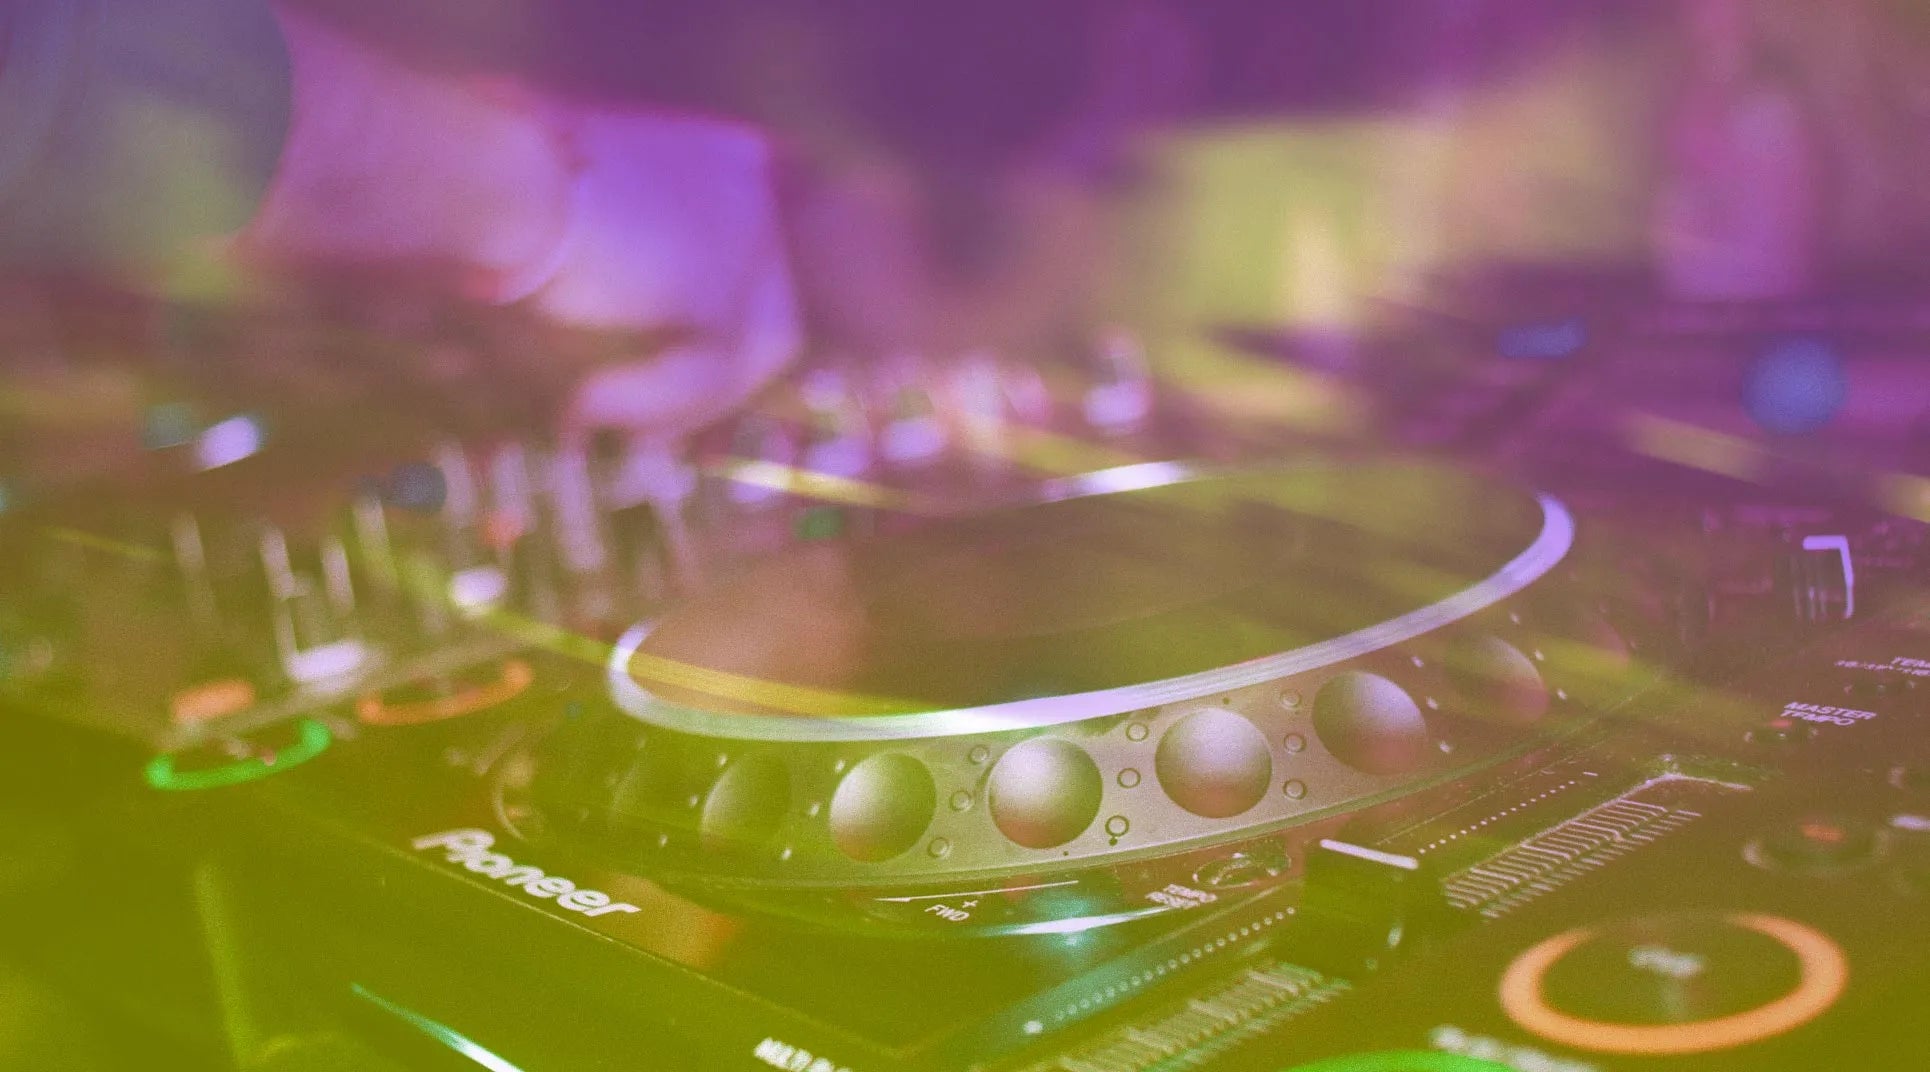 3 Useful DJ Tips from The Pete Tong DJ academy